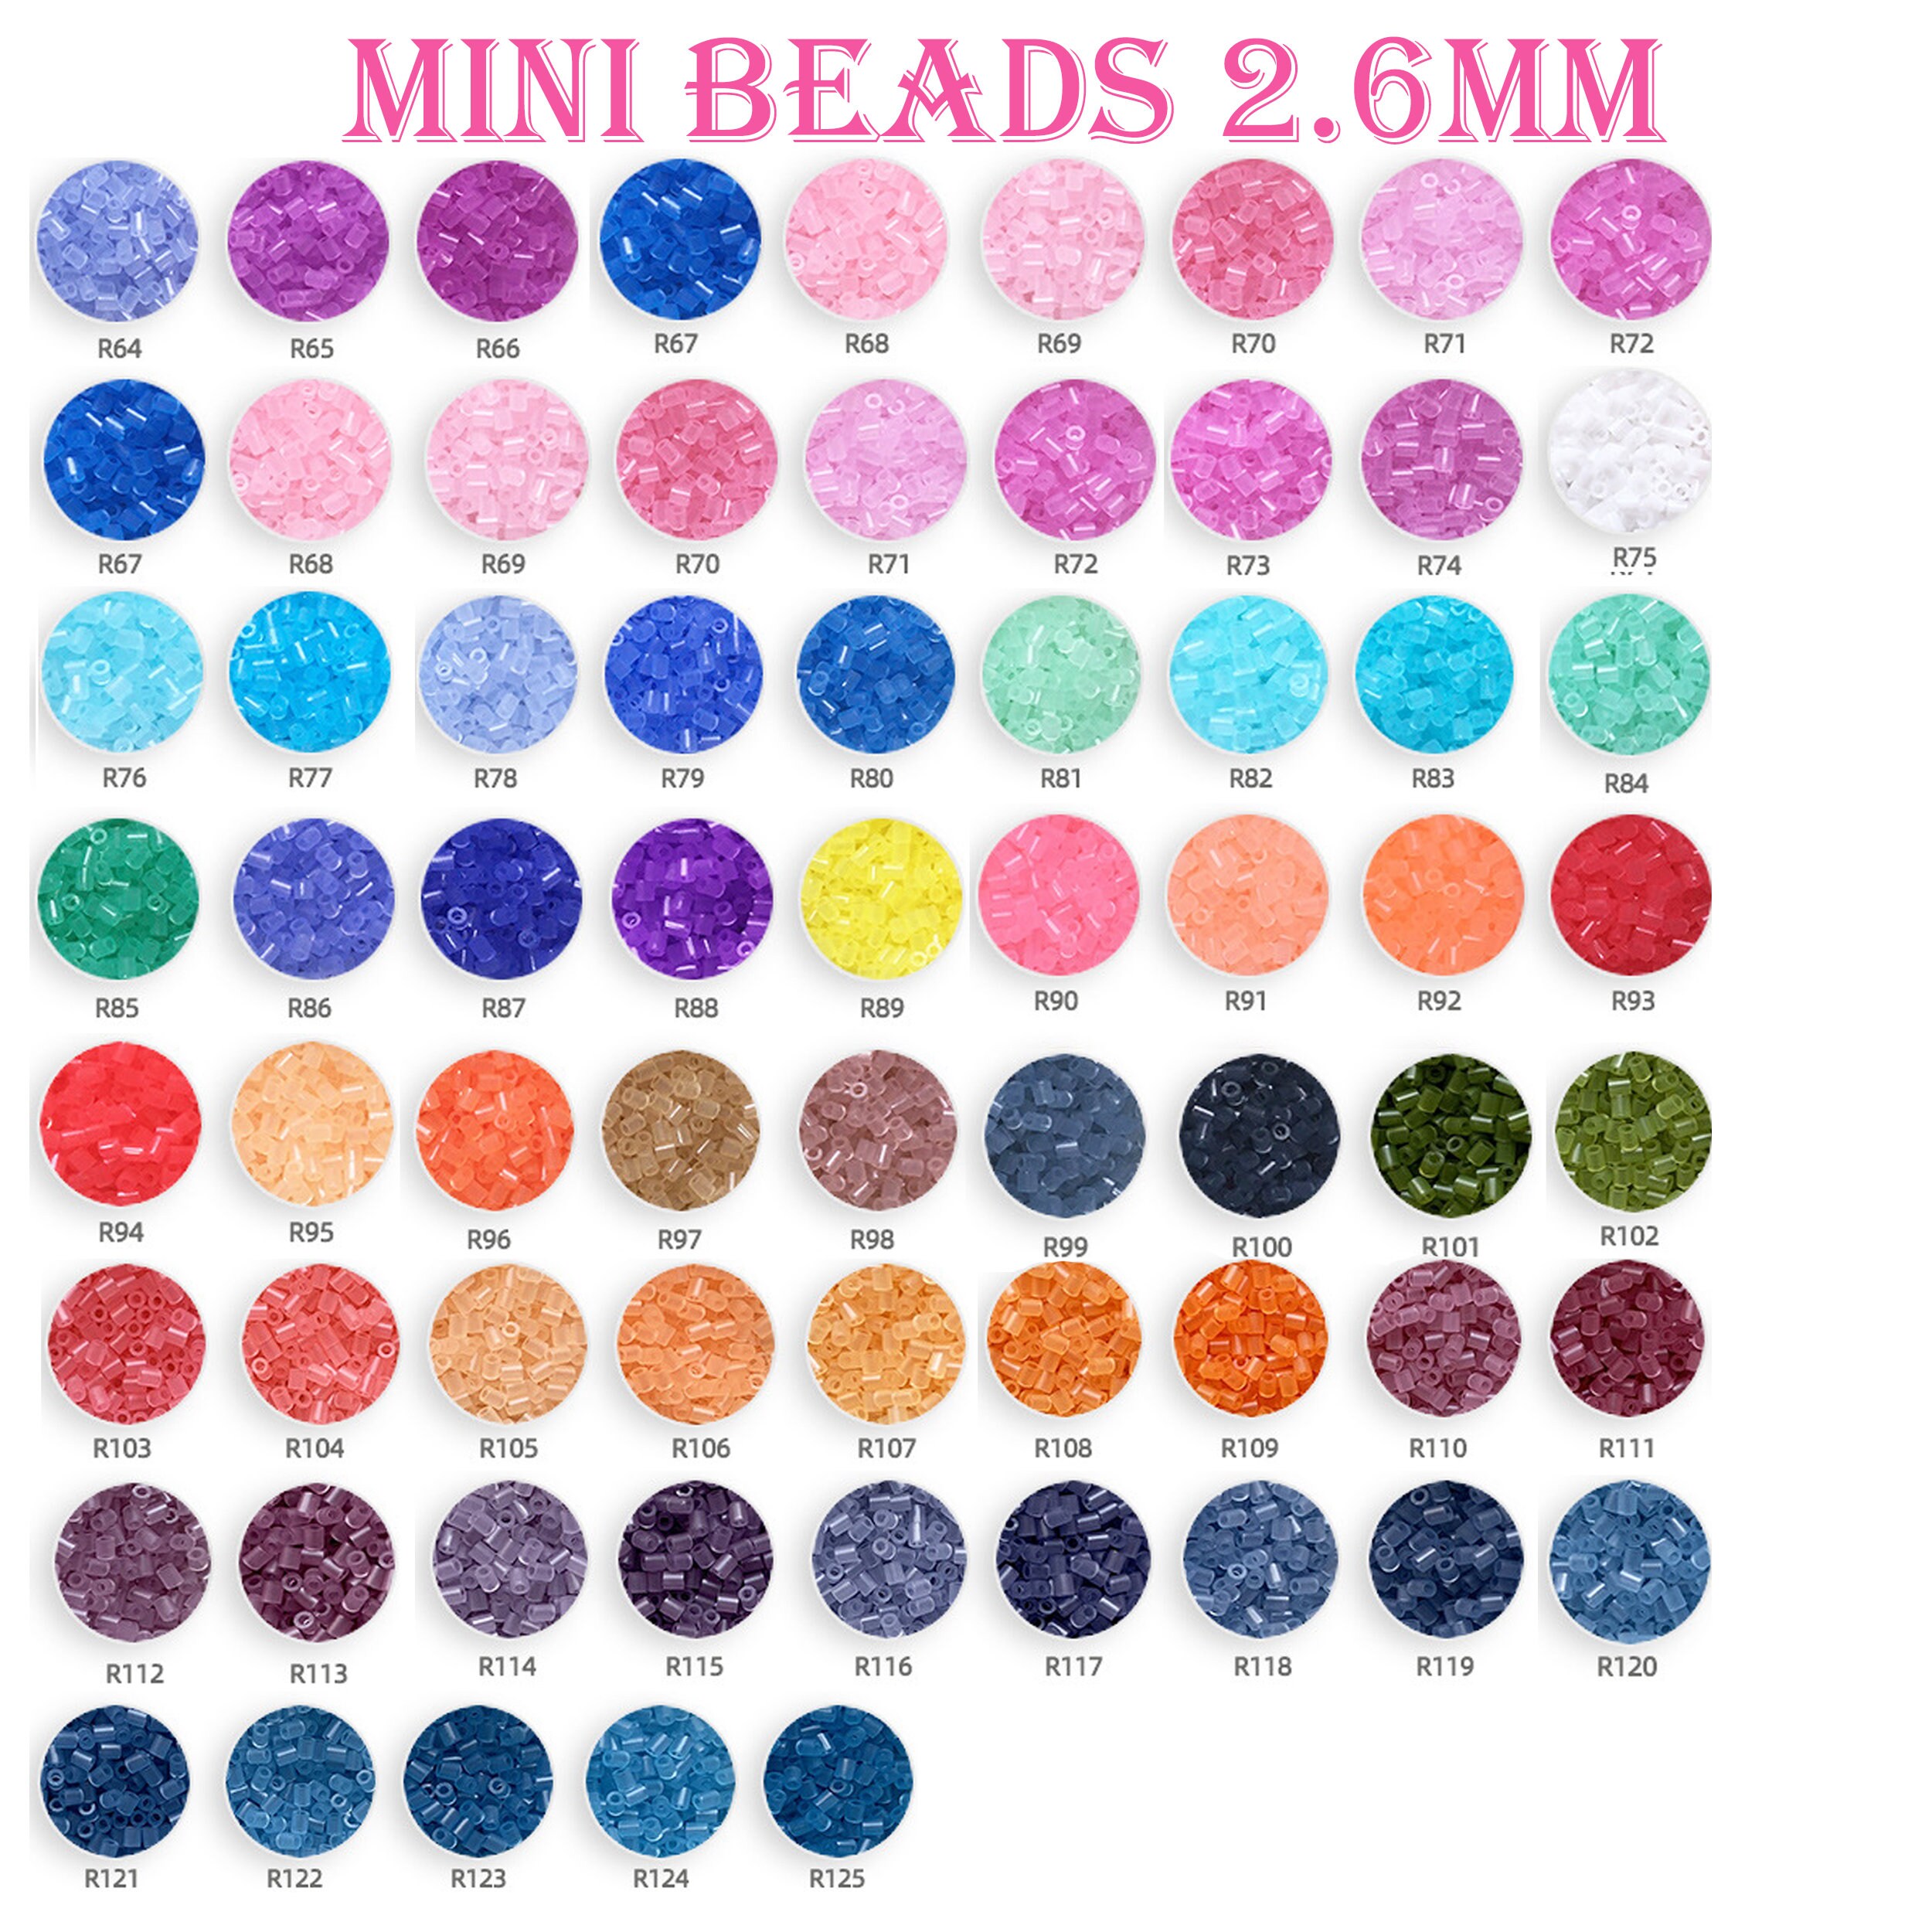 Fuse Beads 2.6MM Mini Iron Beads White 10000pcs and Black 10000pcs for  Crafts, Handmade Decor DIY Make, with 1 Ironing Paper